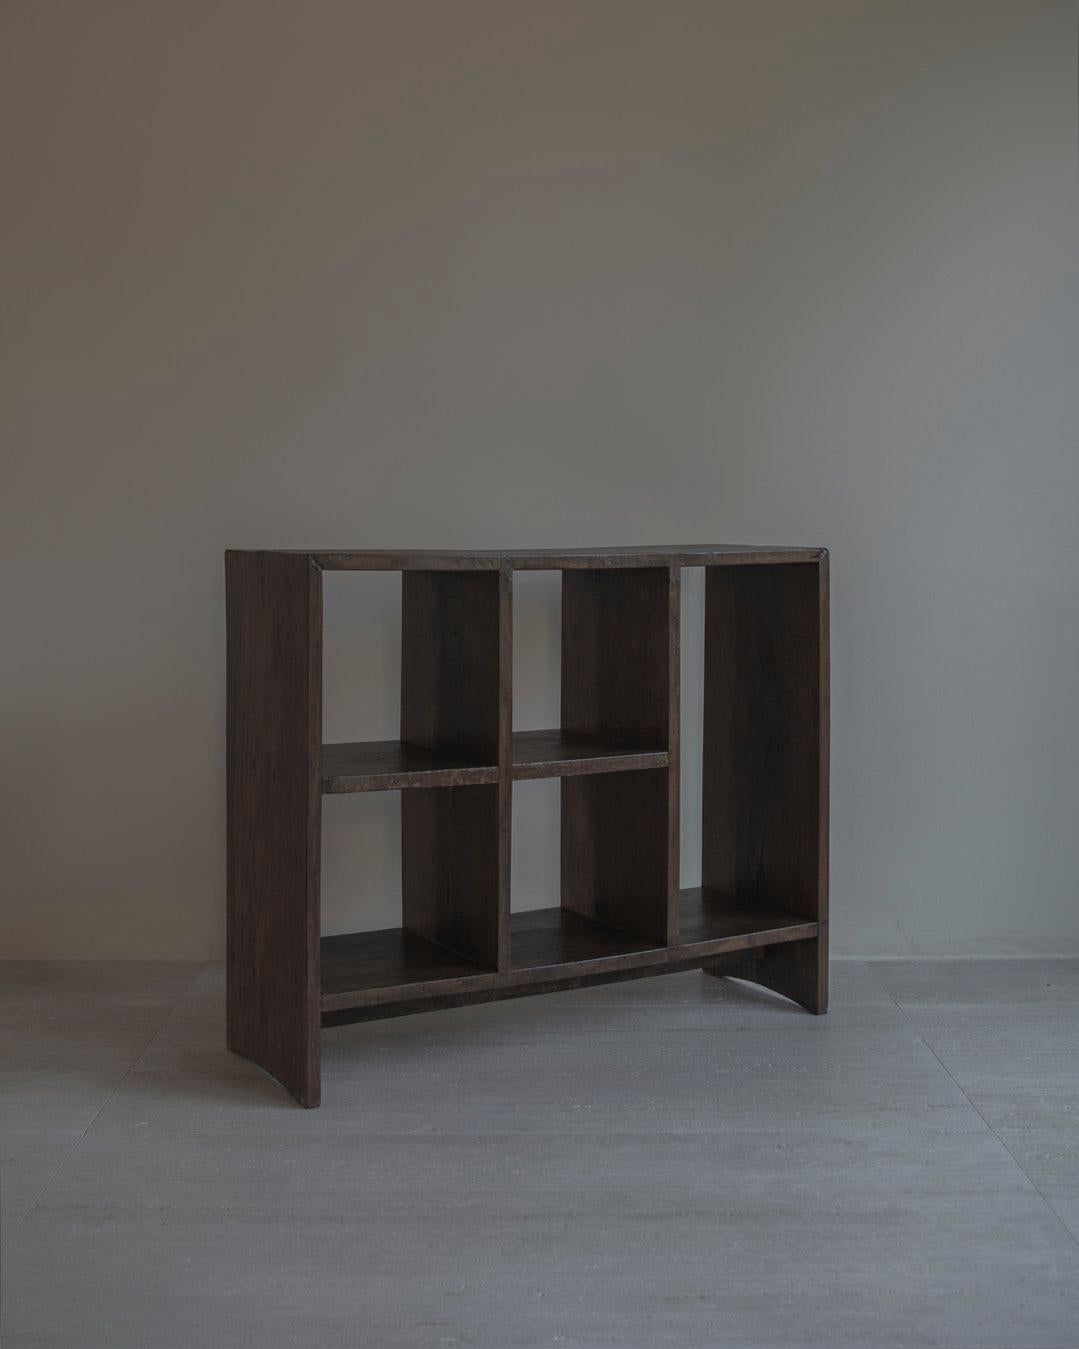 Authentic PJ-R-27-B by Pierre Jeanneret - This double-sided low cupboard, known as “5-hole rack” or 